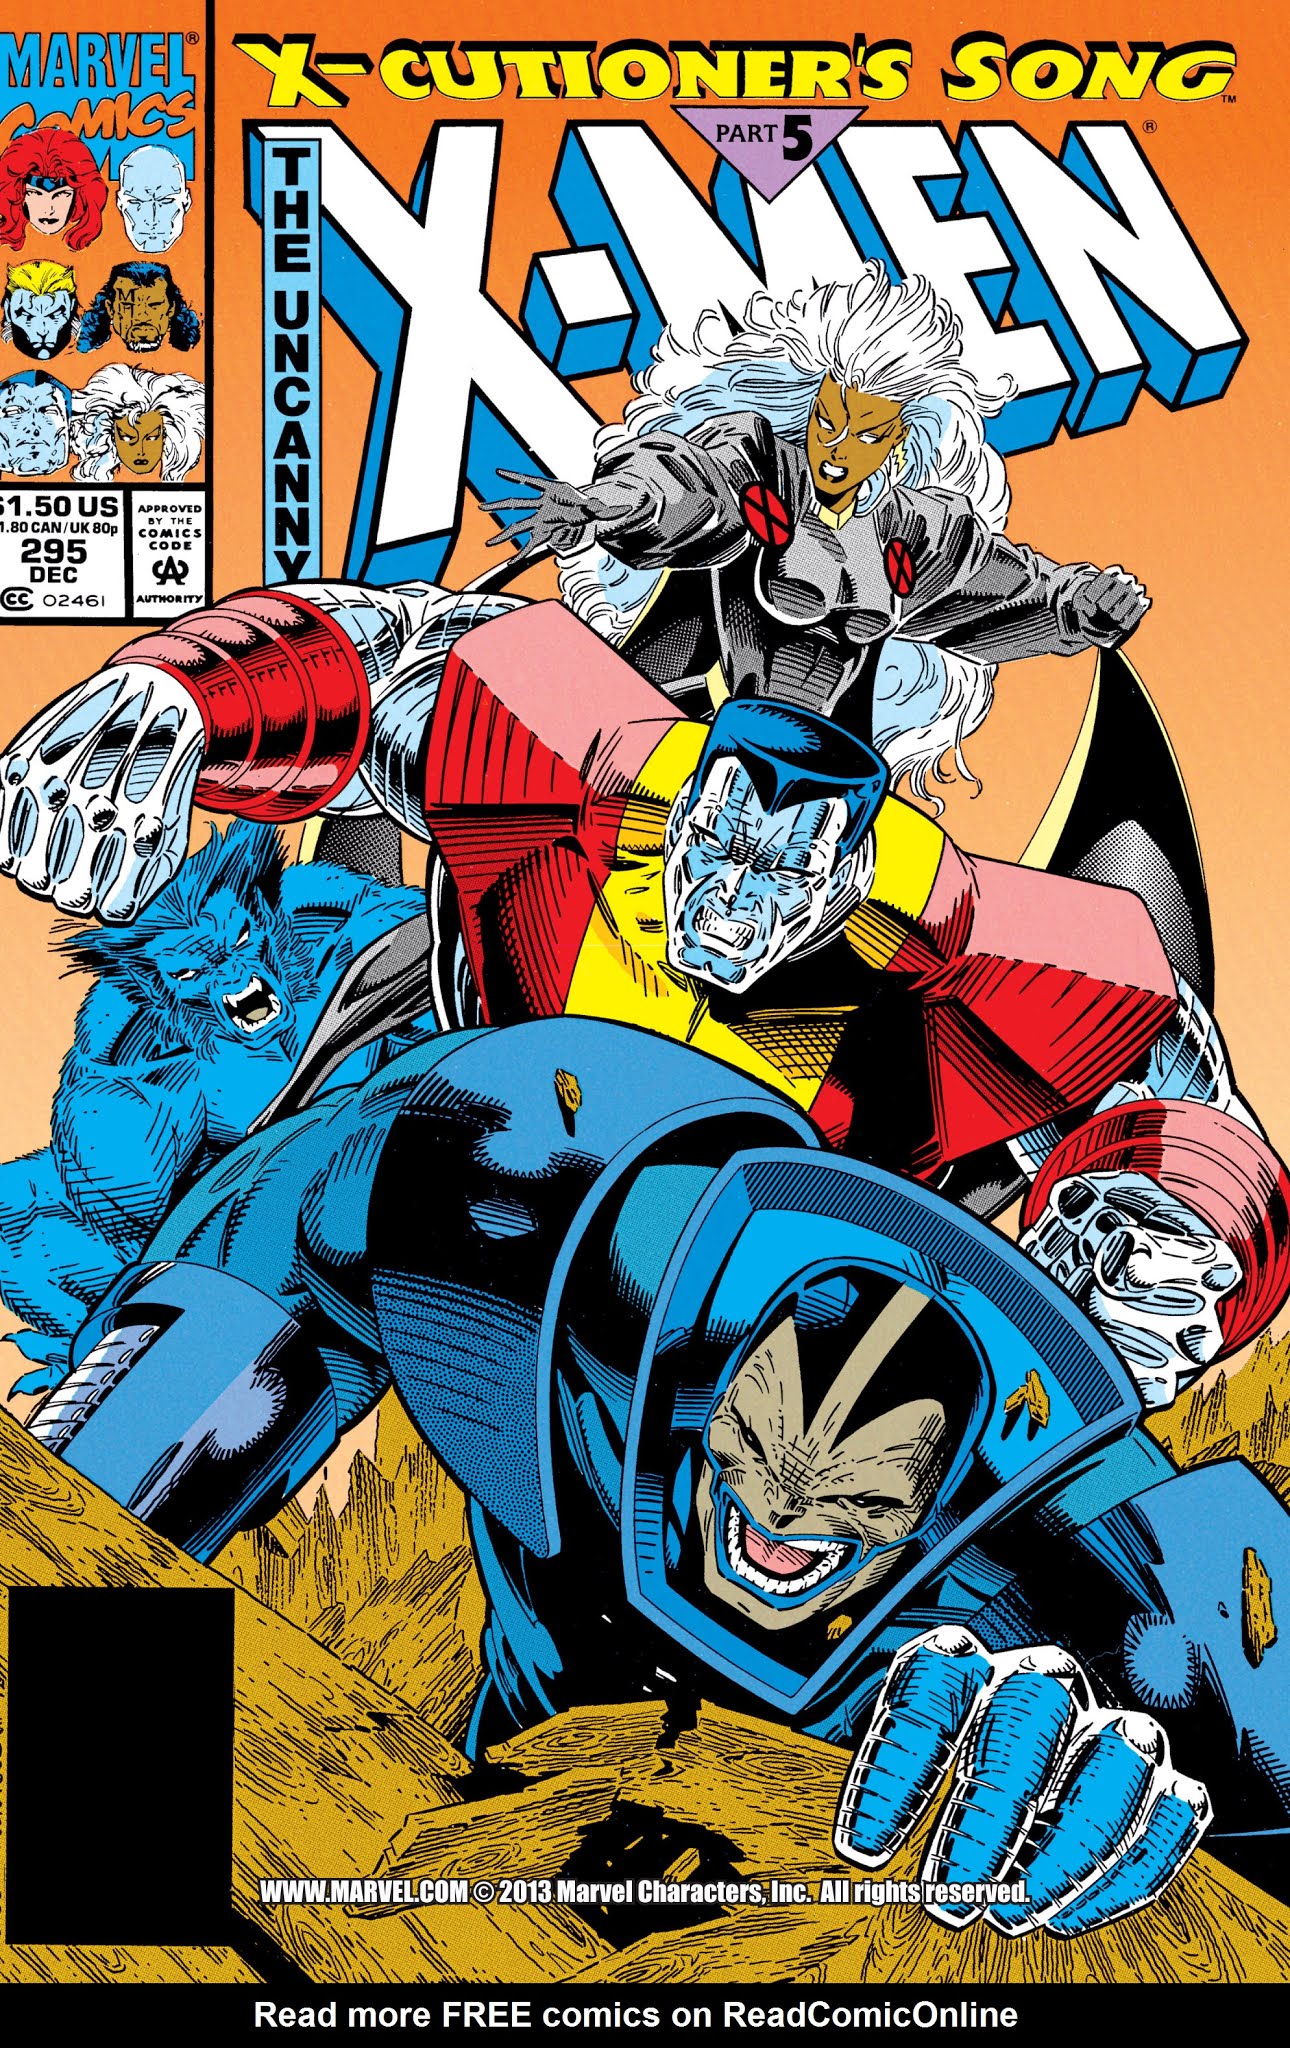 Read online X-Men: X-Cutioner's Song comic -  Issue # TPB - 96